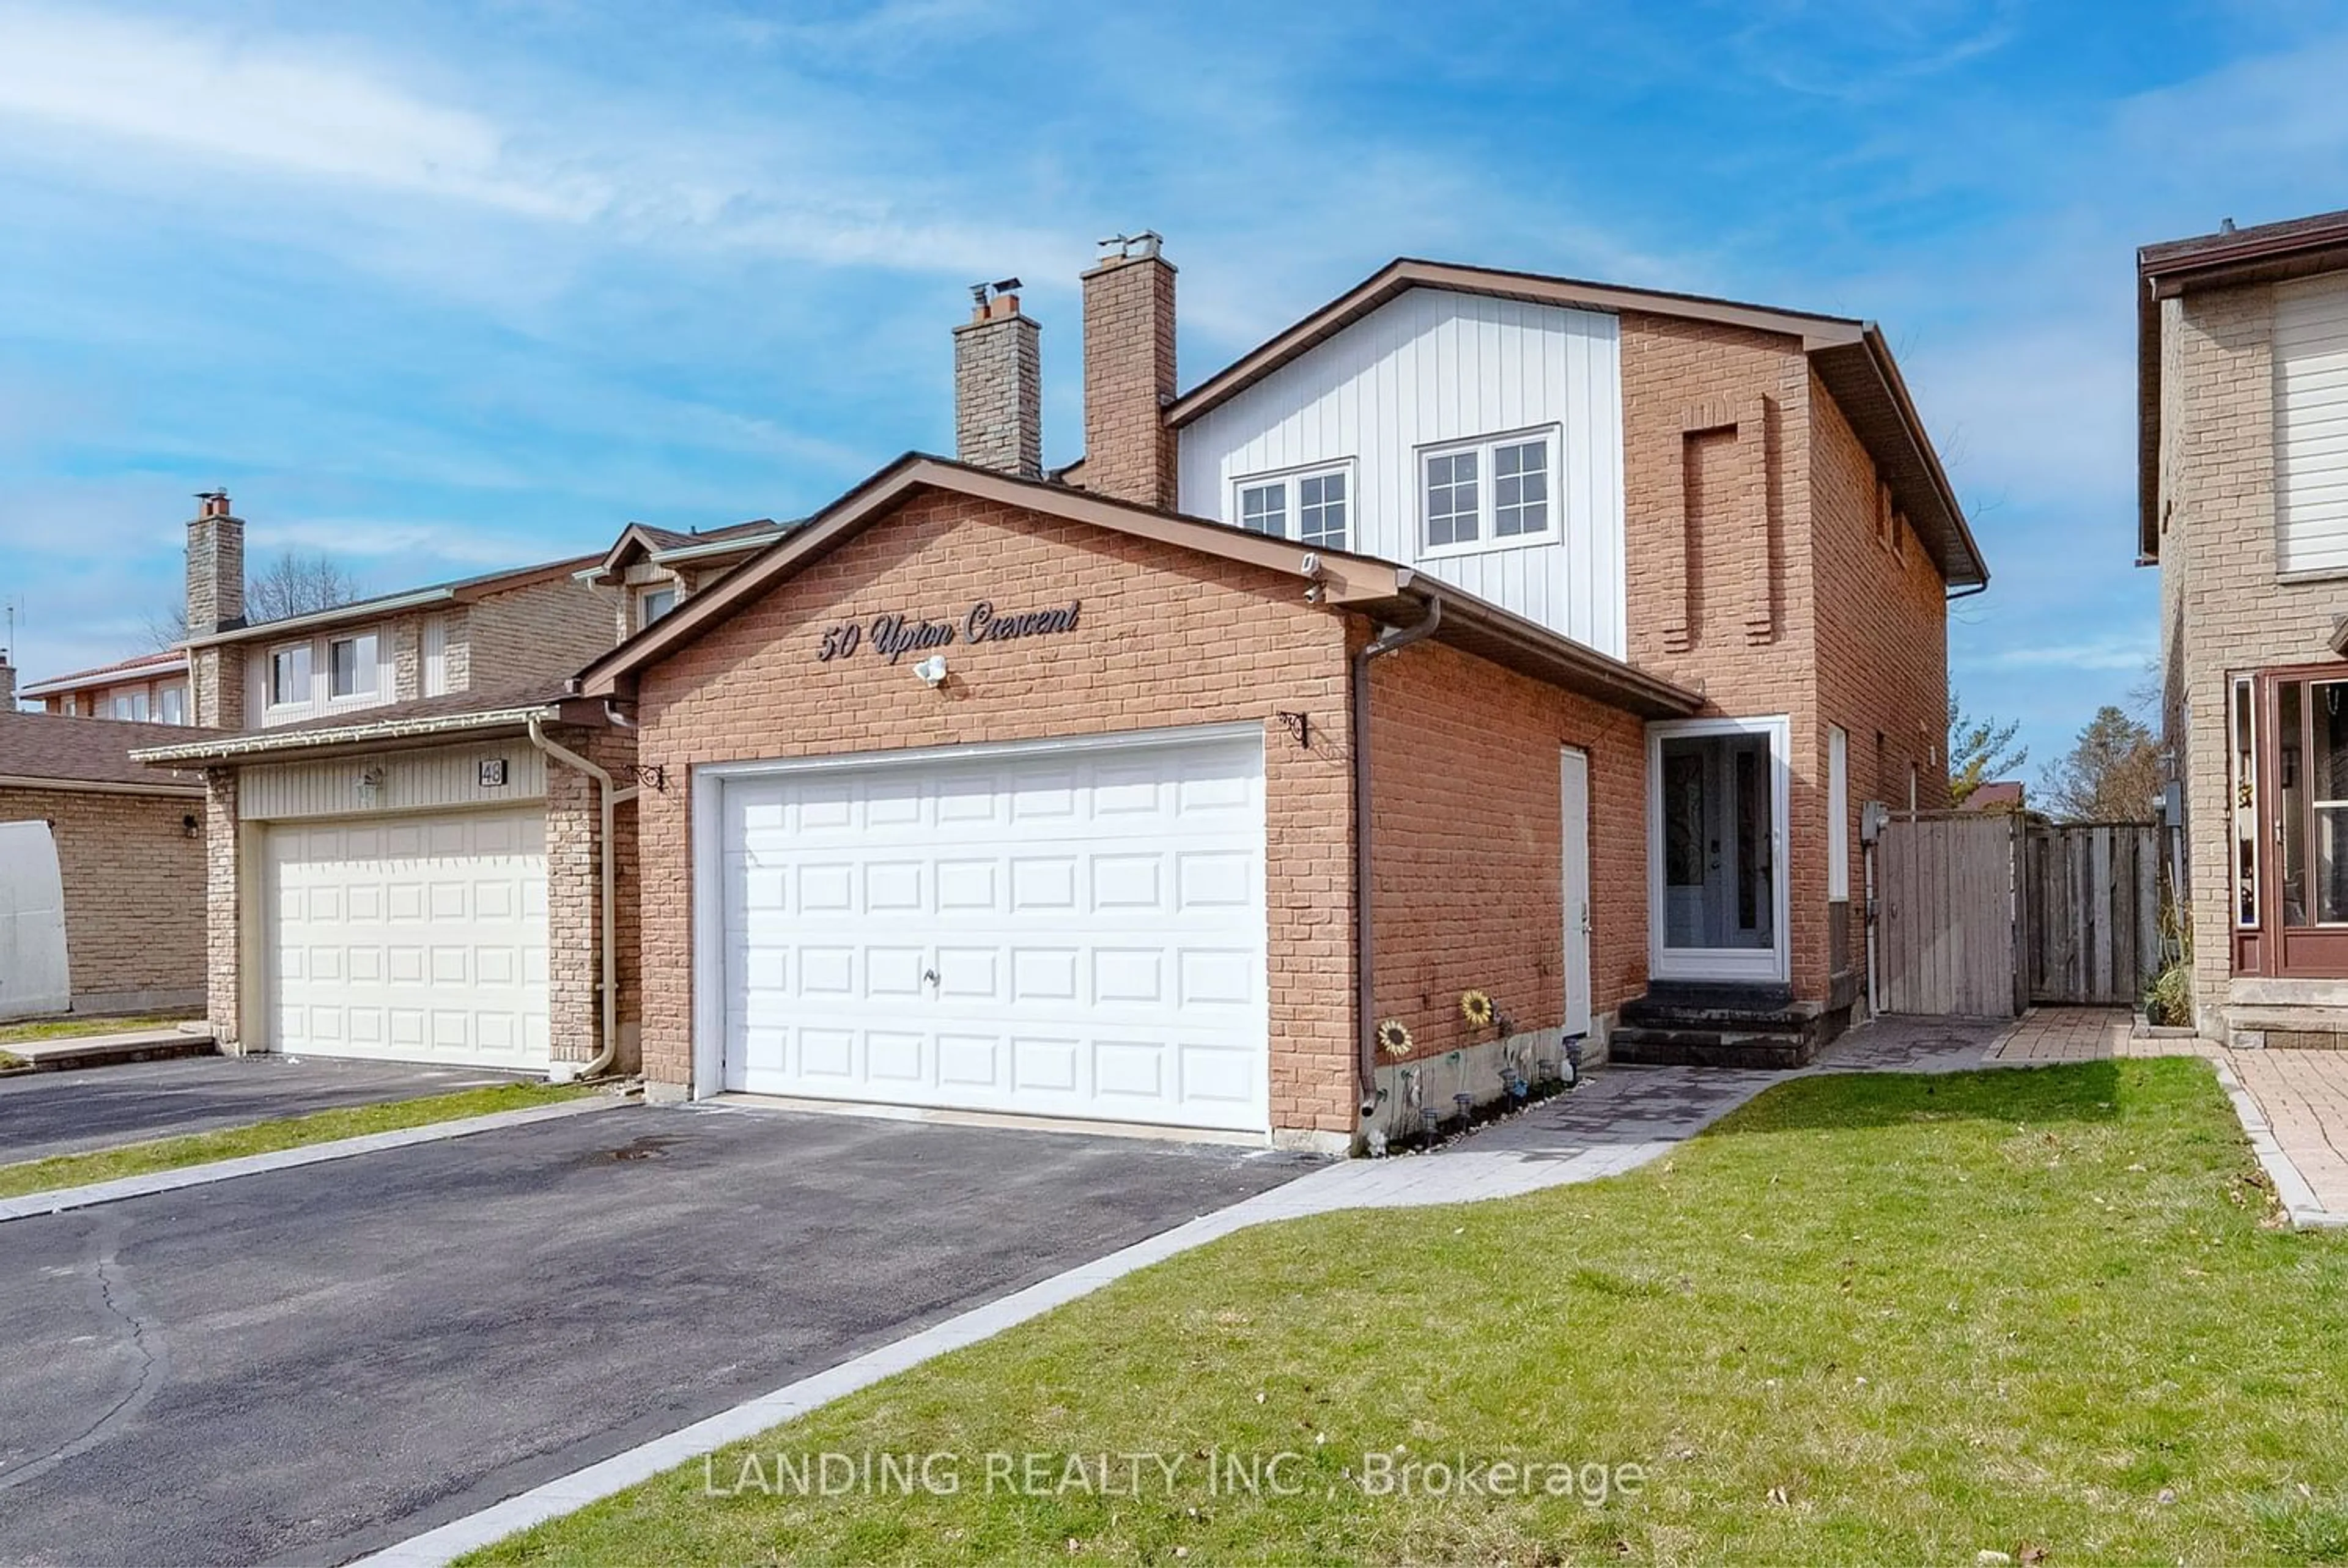 Home with brick exterior material for 50 Upton Cres, Markham Ontario L3R 3T4